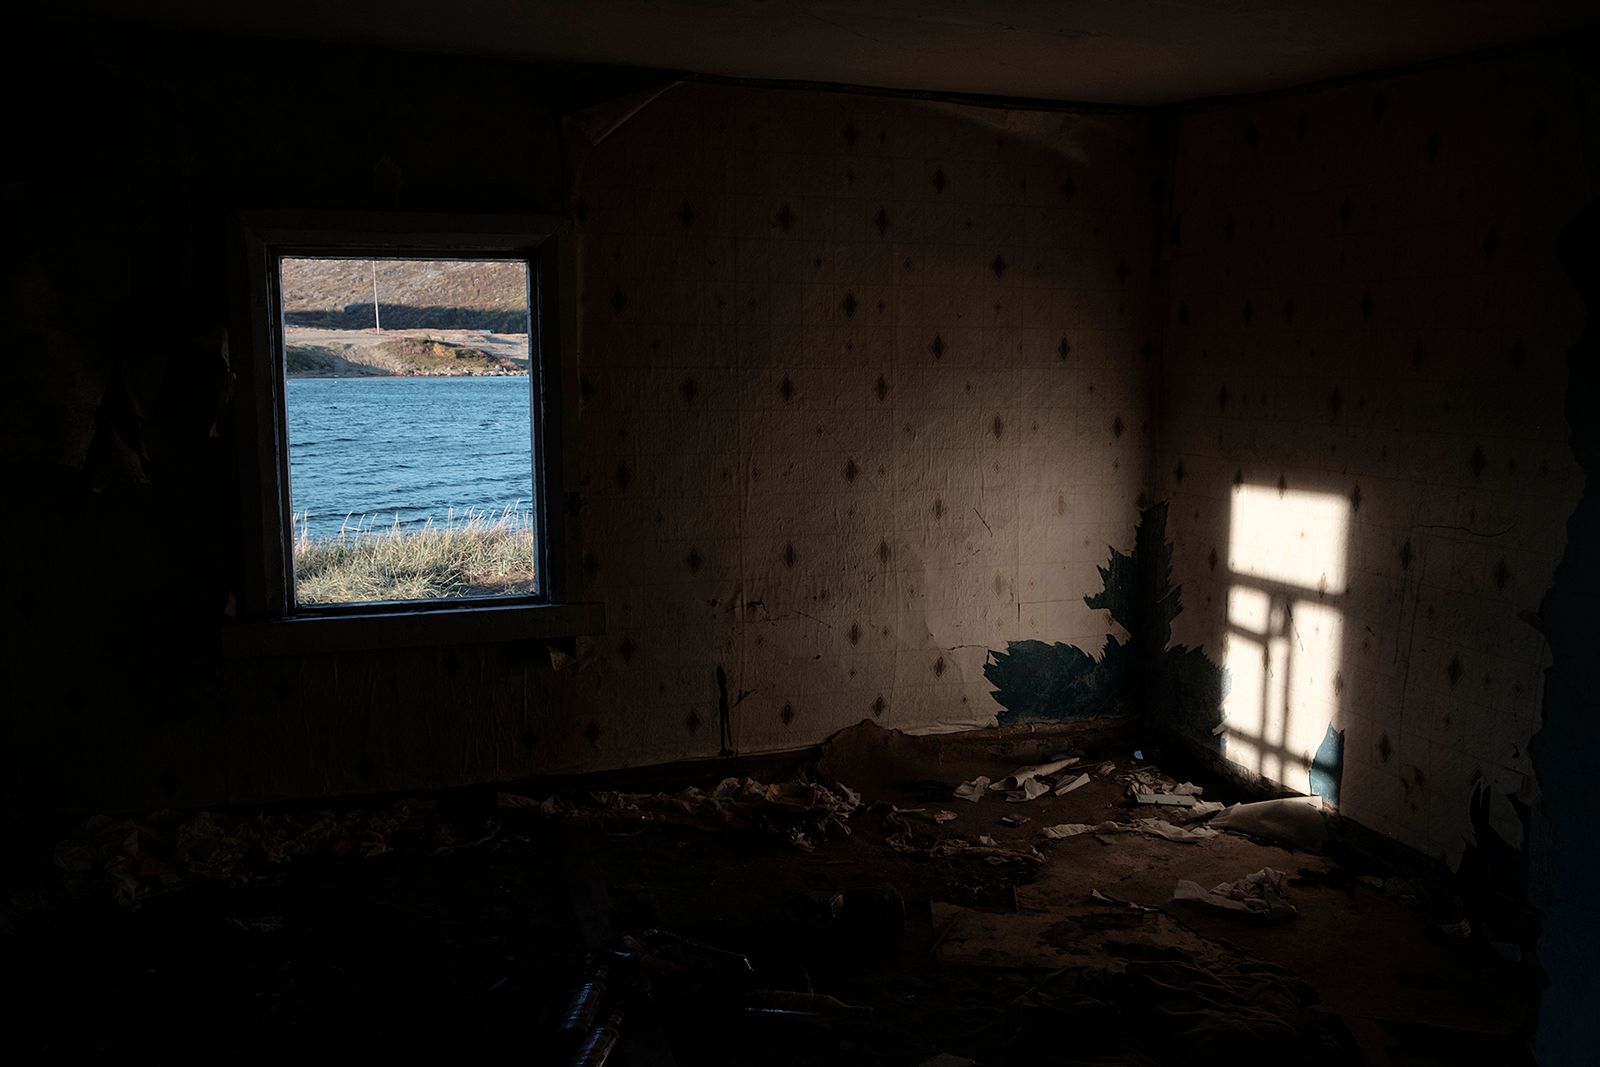 © ANASTASIA DUBRAVA - Image from the Abandoned belongings photography project